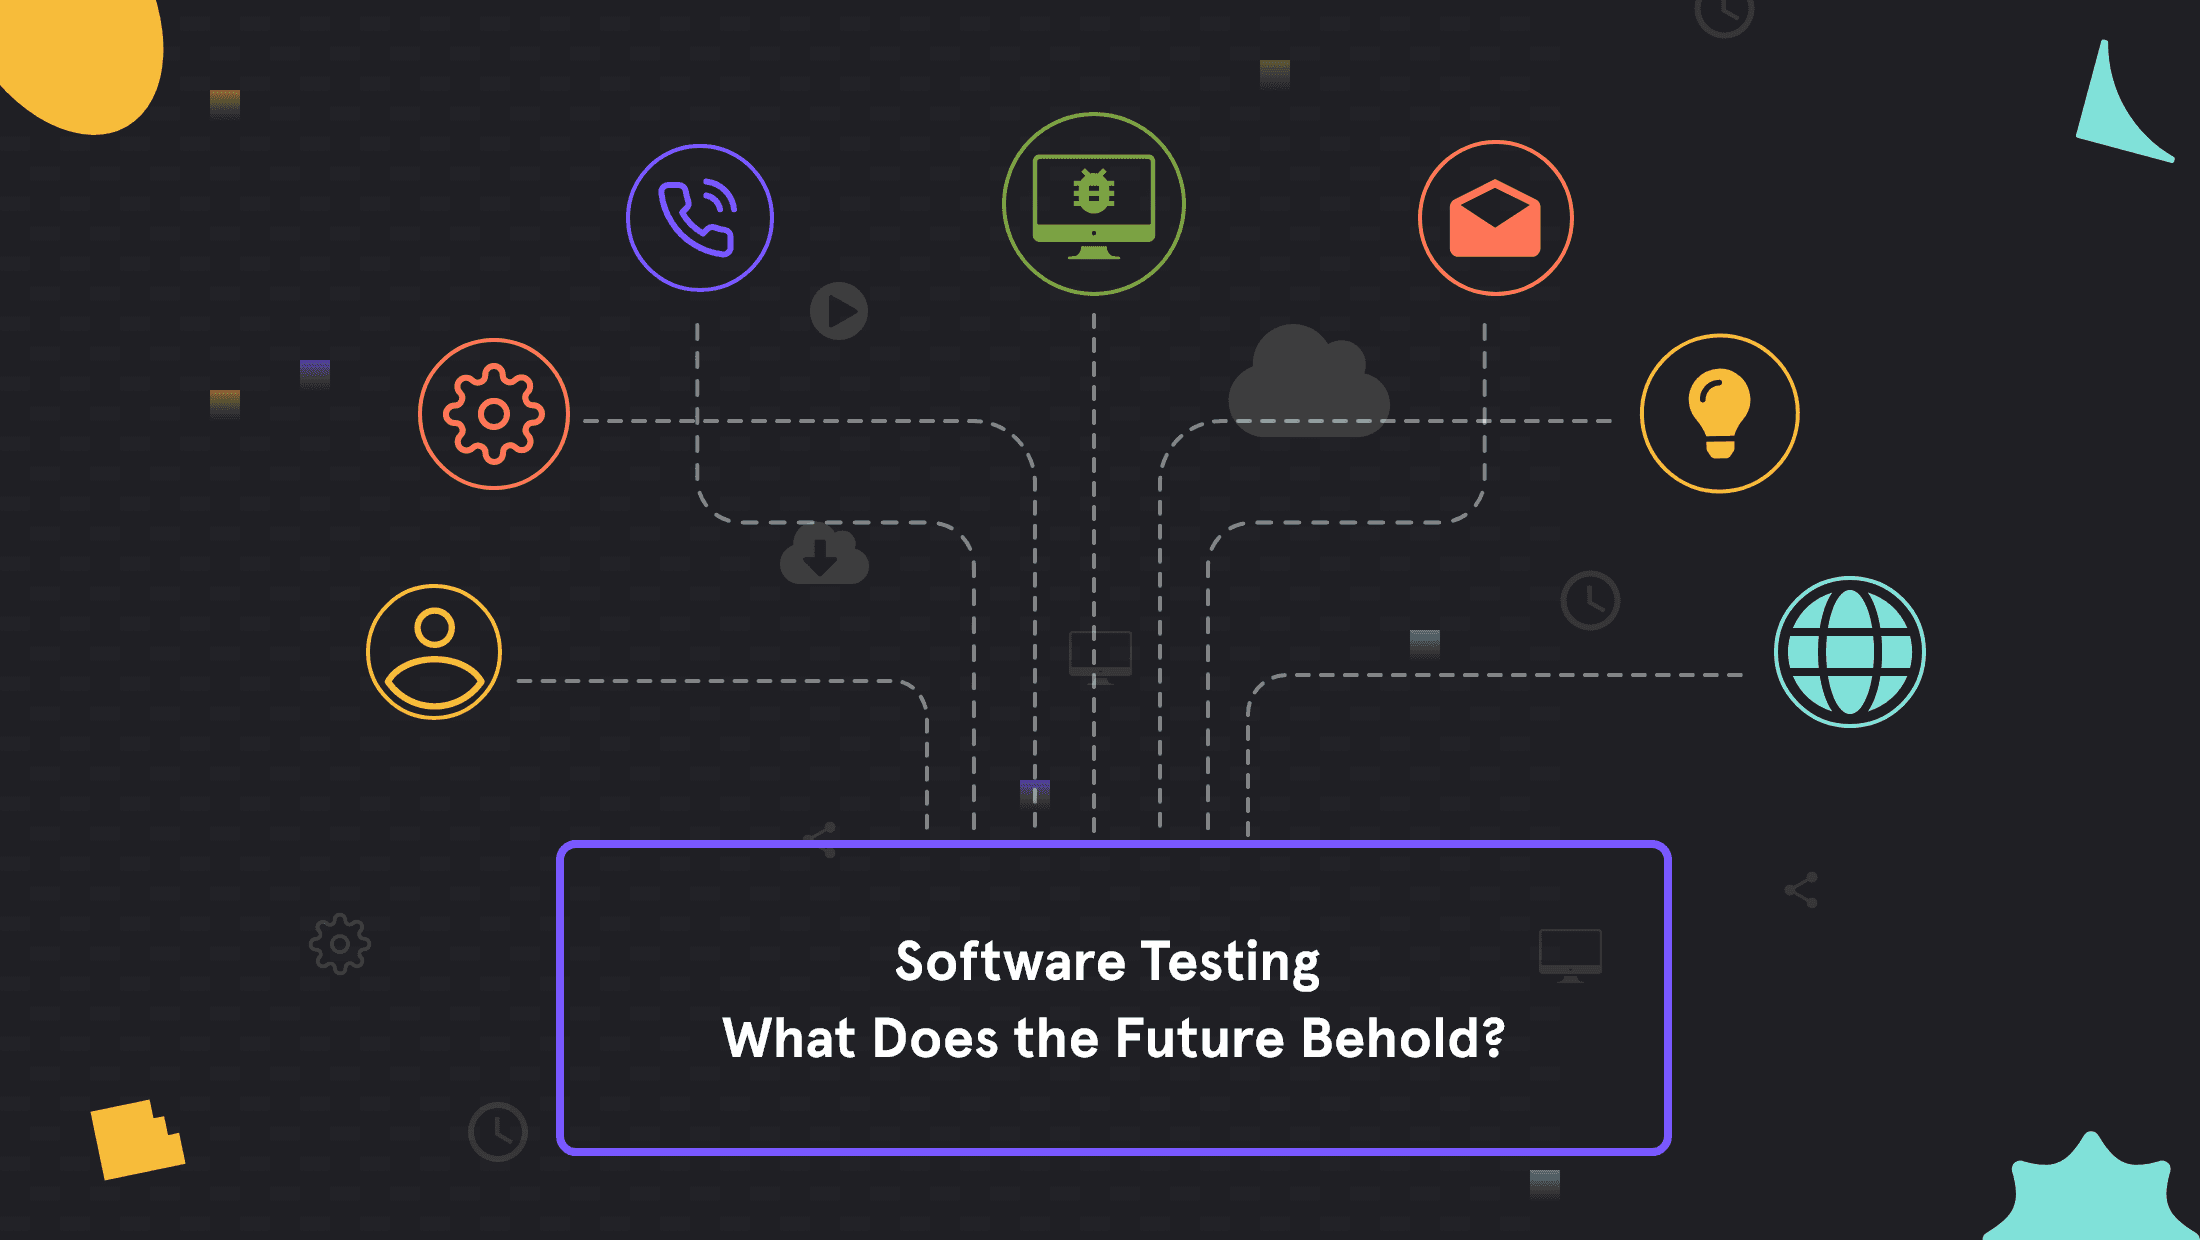 Software Testing- What Does the Future Behold?